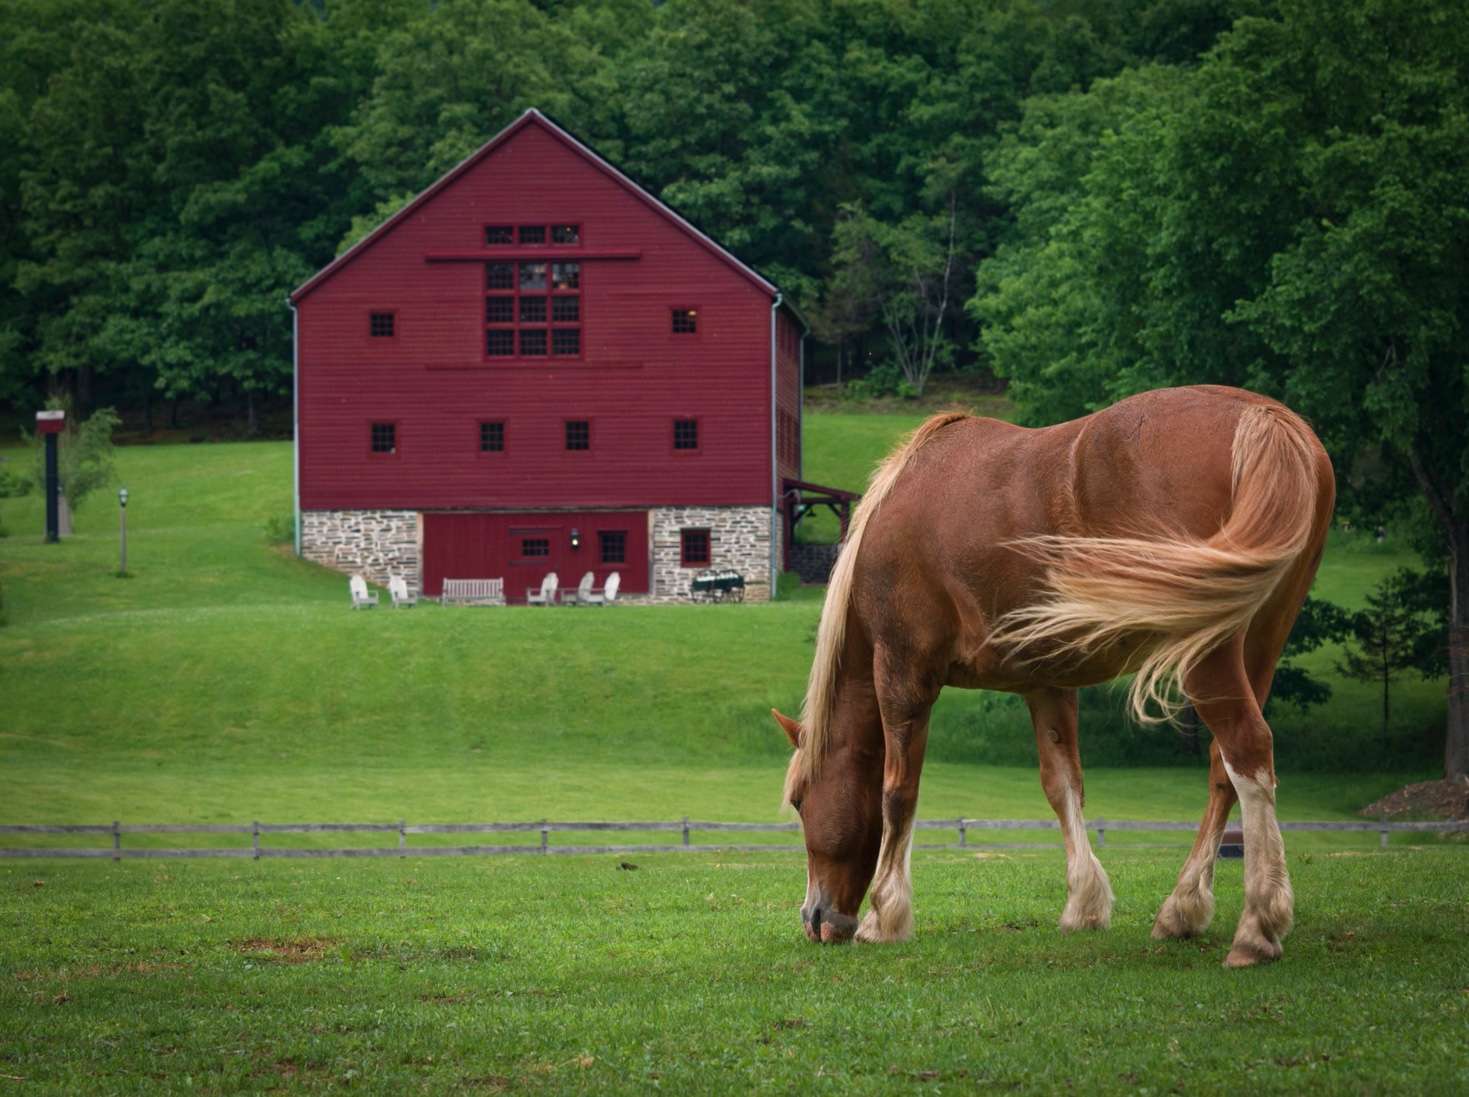 Horse grazing with a red horse barn in the distance